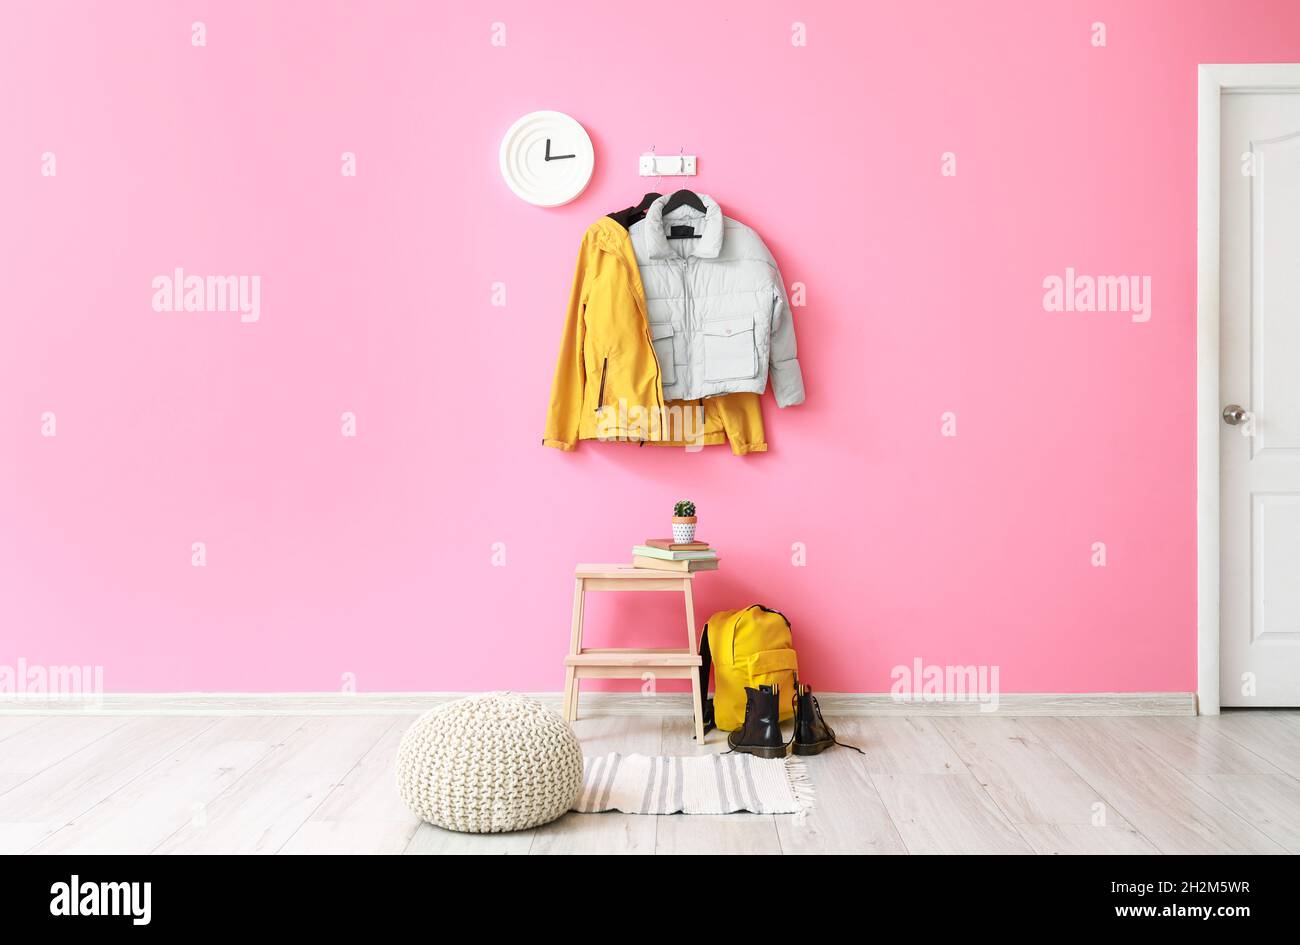 Interior of hallway with stylish jackets and pink wall Stock Photo